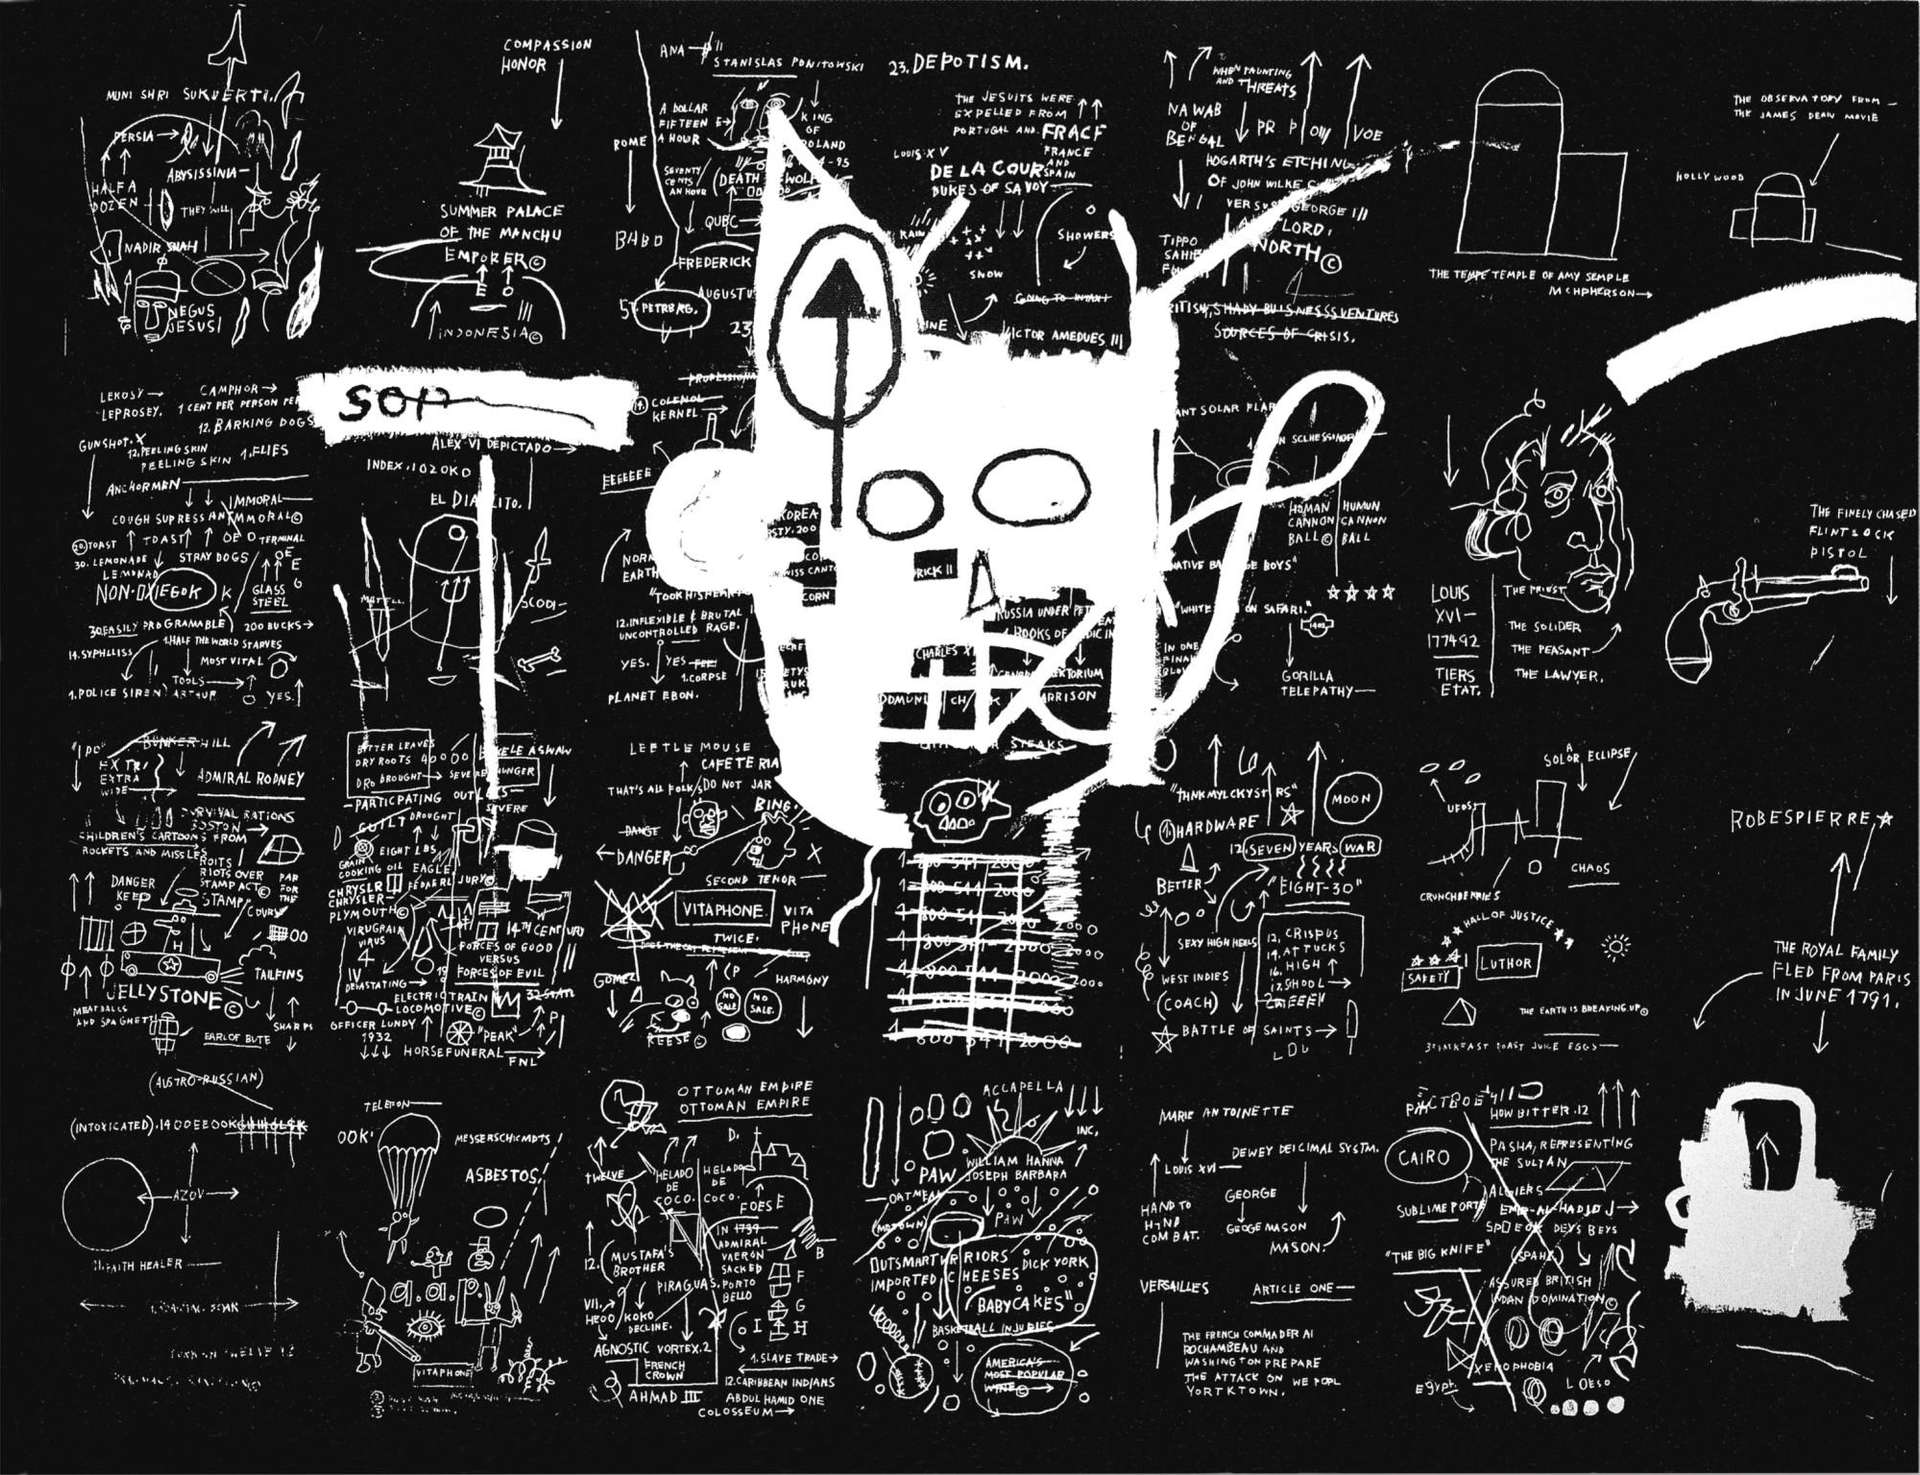 A screenprint by Jean-Michel Basquiat depicting a large white head at the centre of a black background, with white typography and illustrations around the composition.